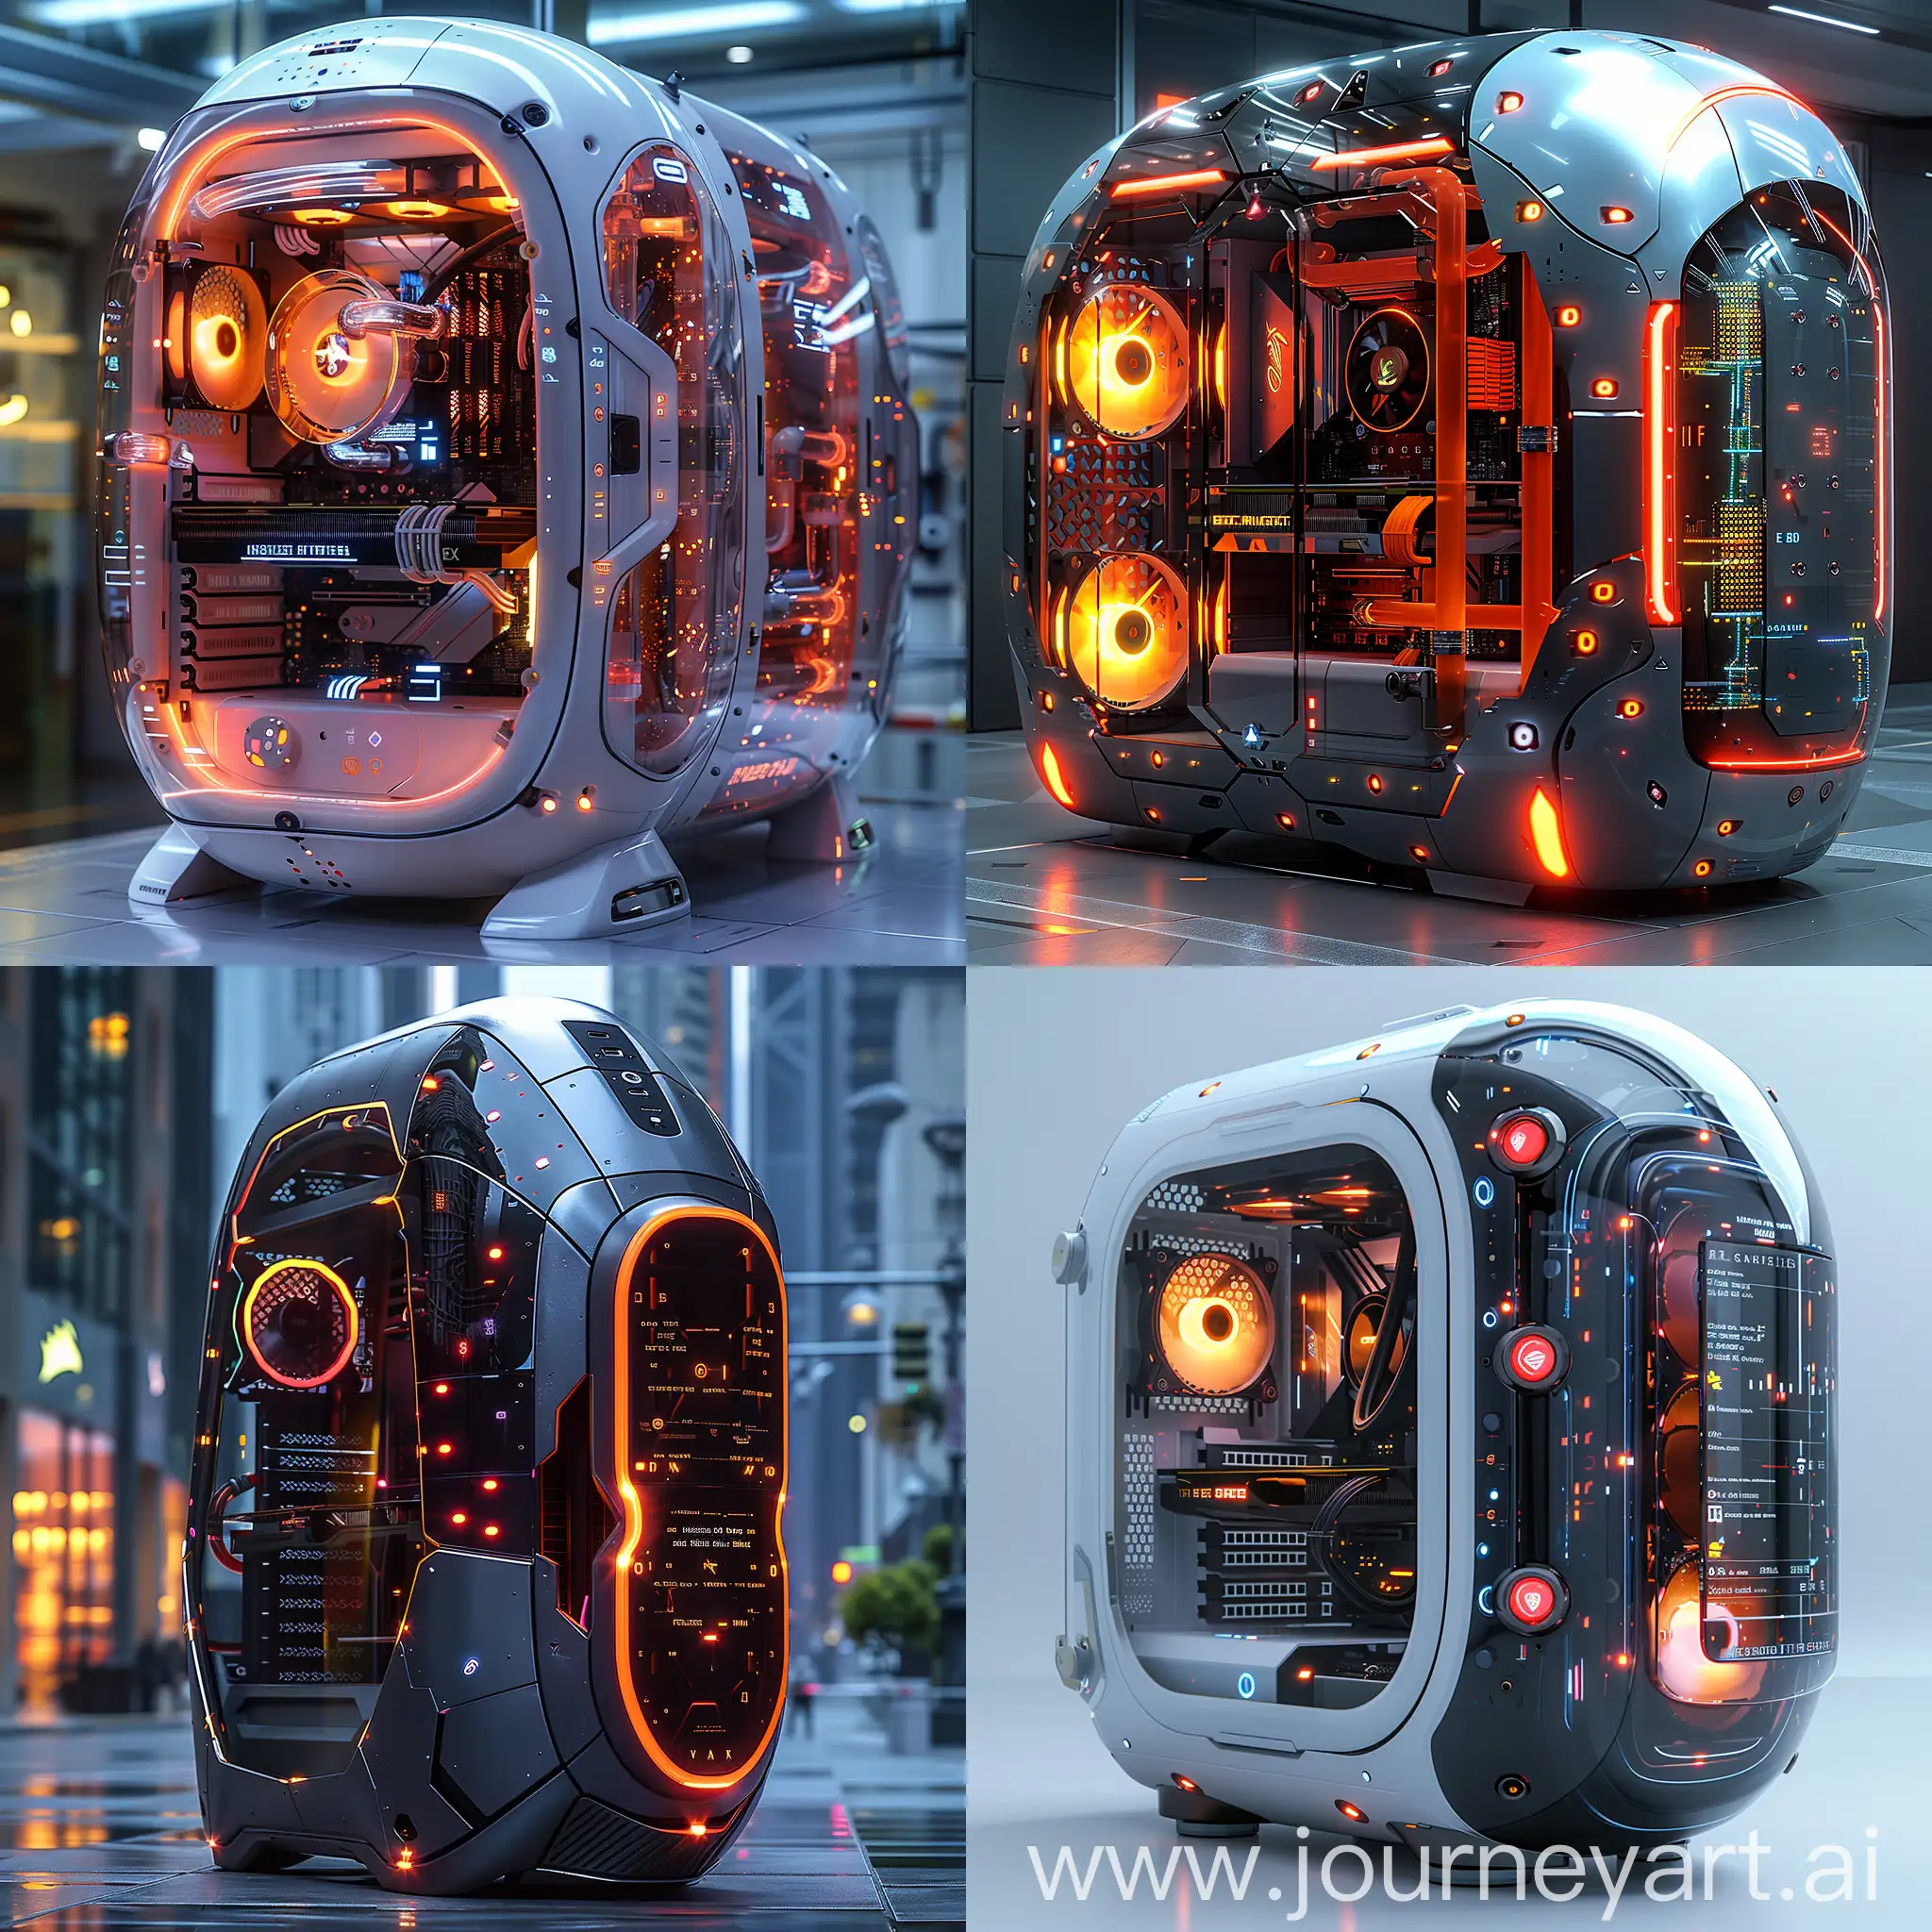 UltraFuturistic-PC-Case-with-Modular-Components-and-AI-Integration